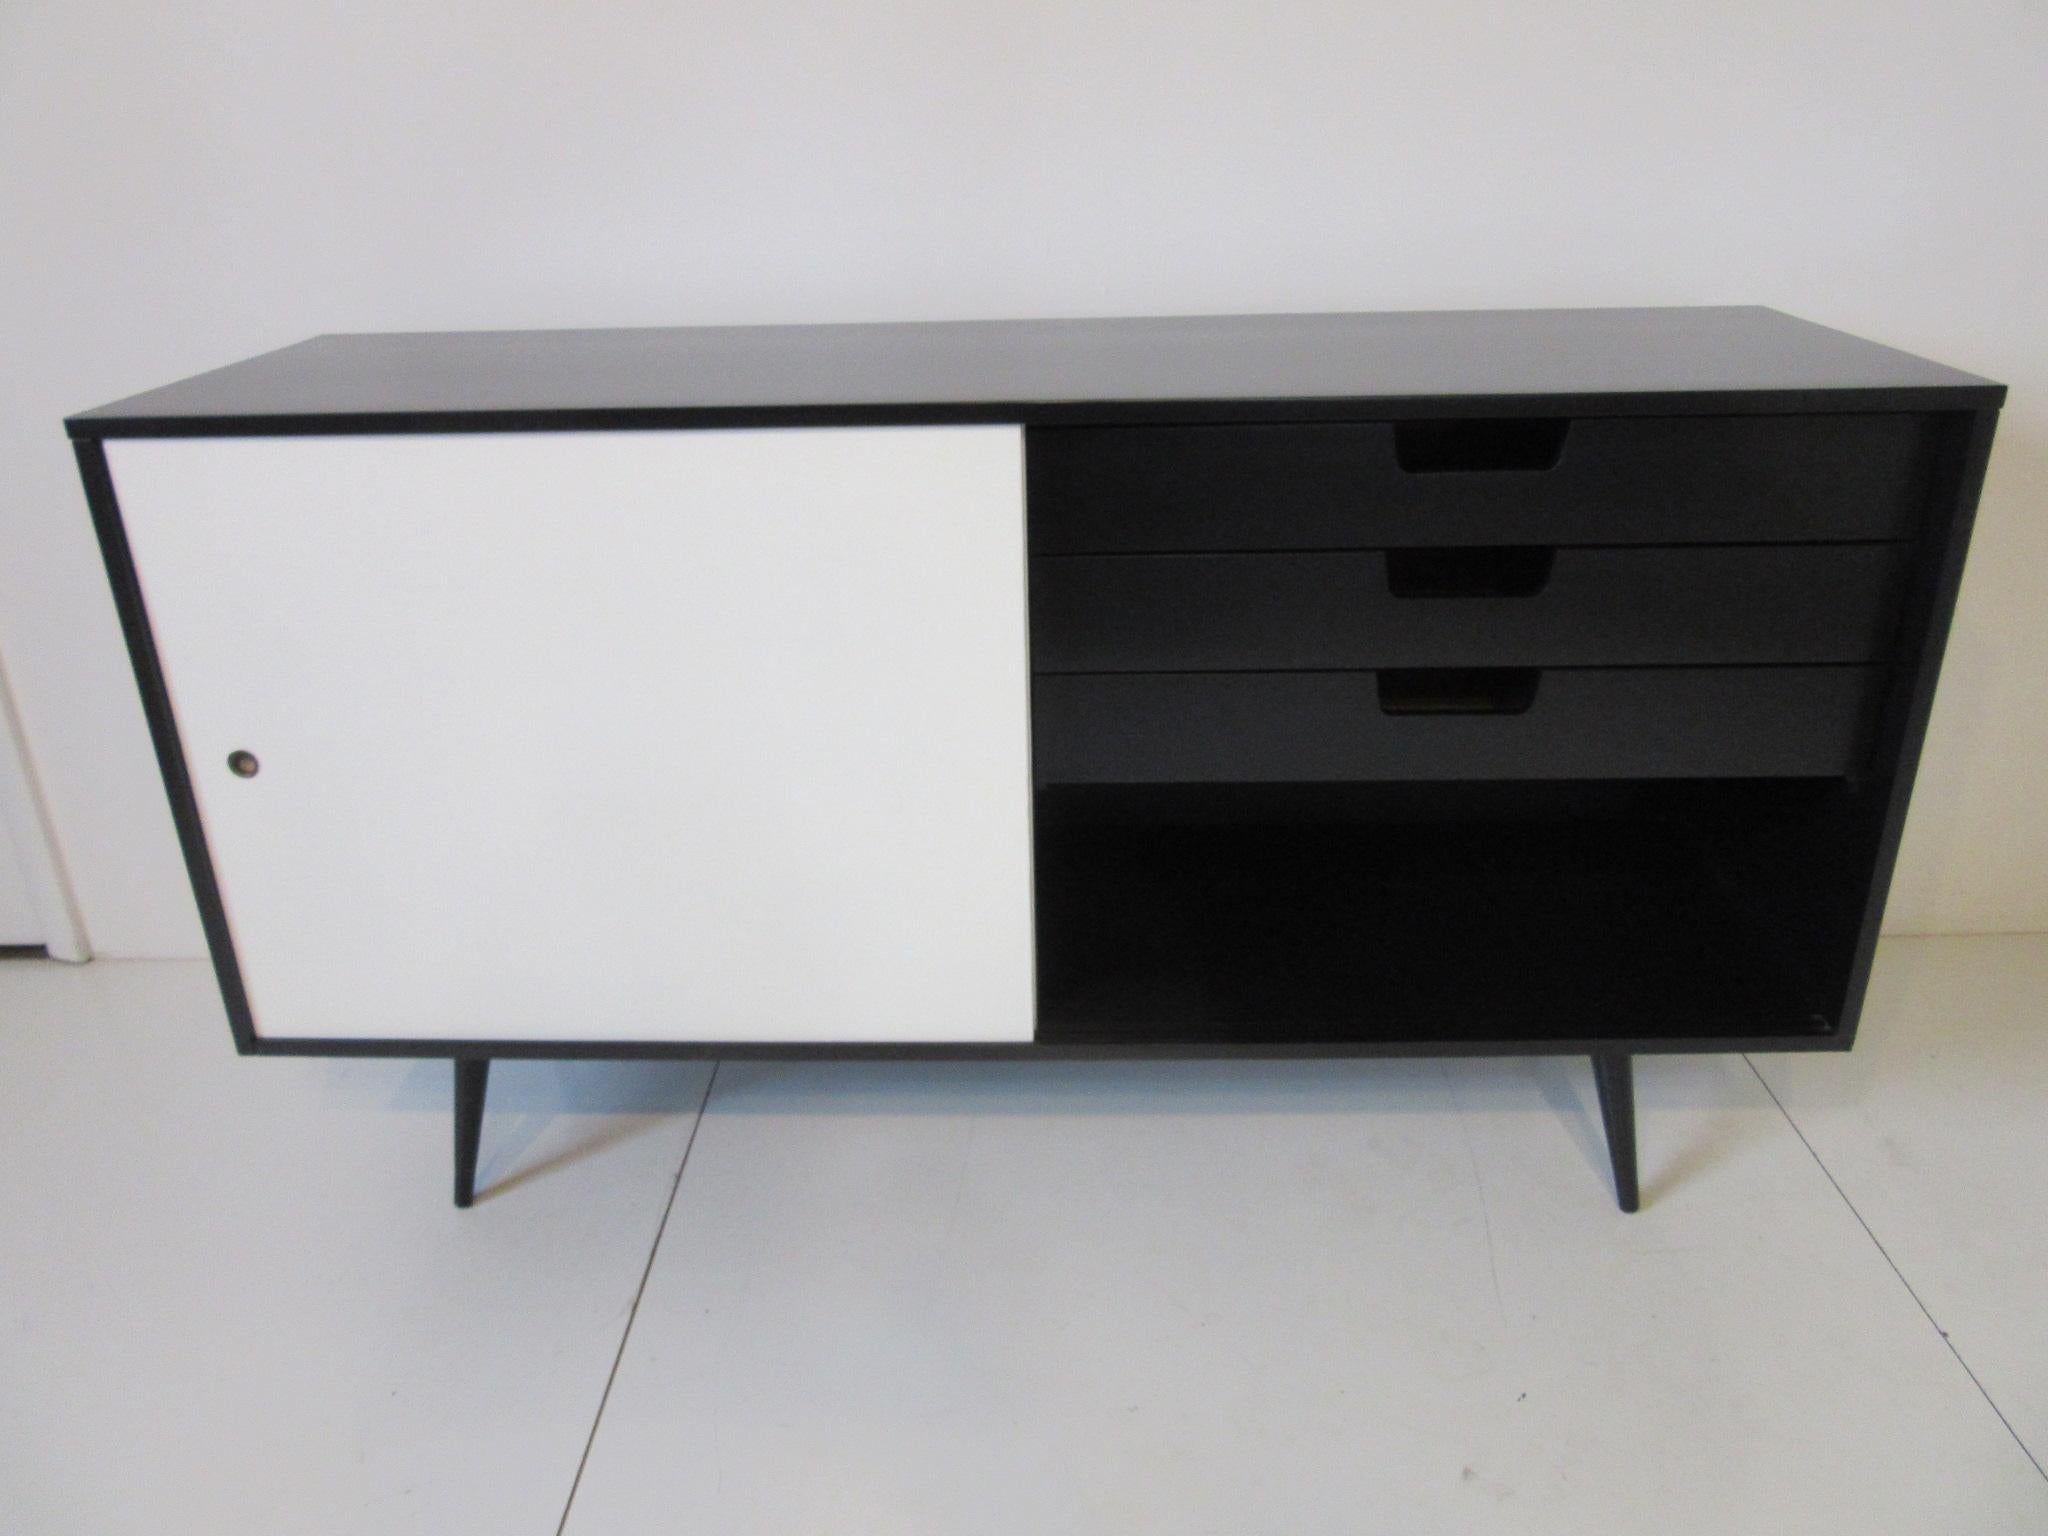 A satin black solid wood credenza with three drawers to the right side and one drawer with an adjustable shelve plus storage to the left side. Two siding white doors give this piece a tailored and thigh look, manufactured by the Winchendon furniture